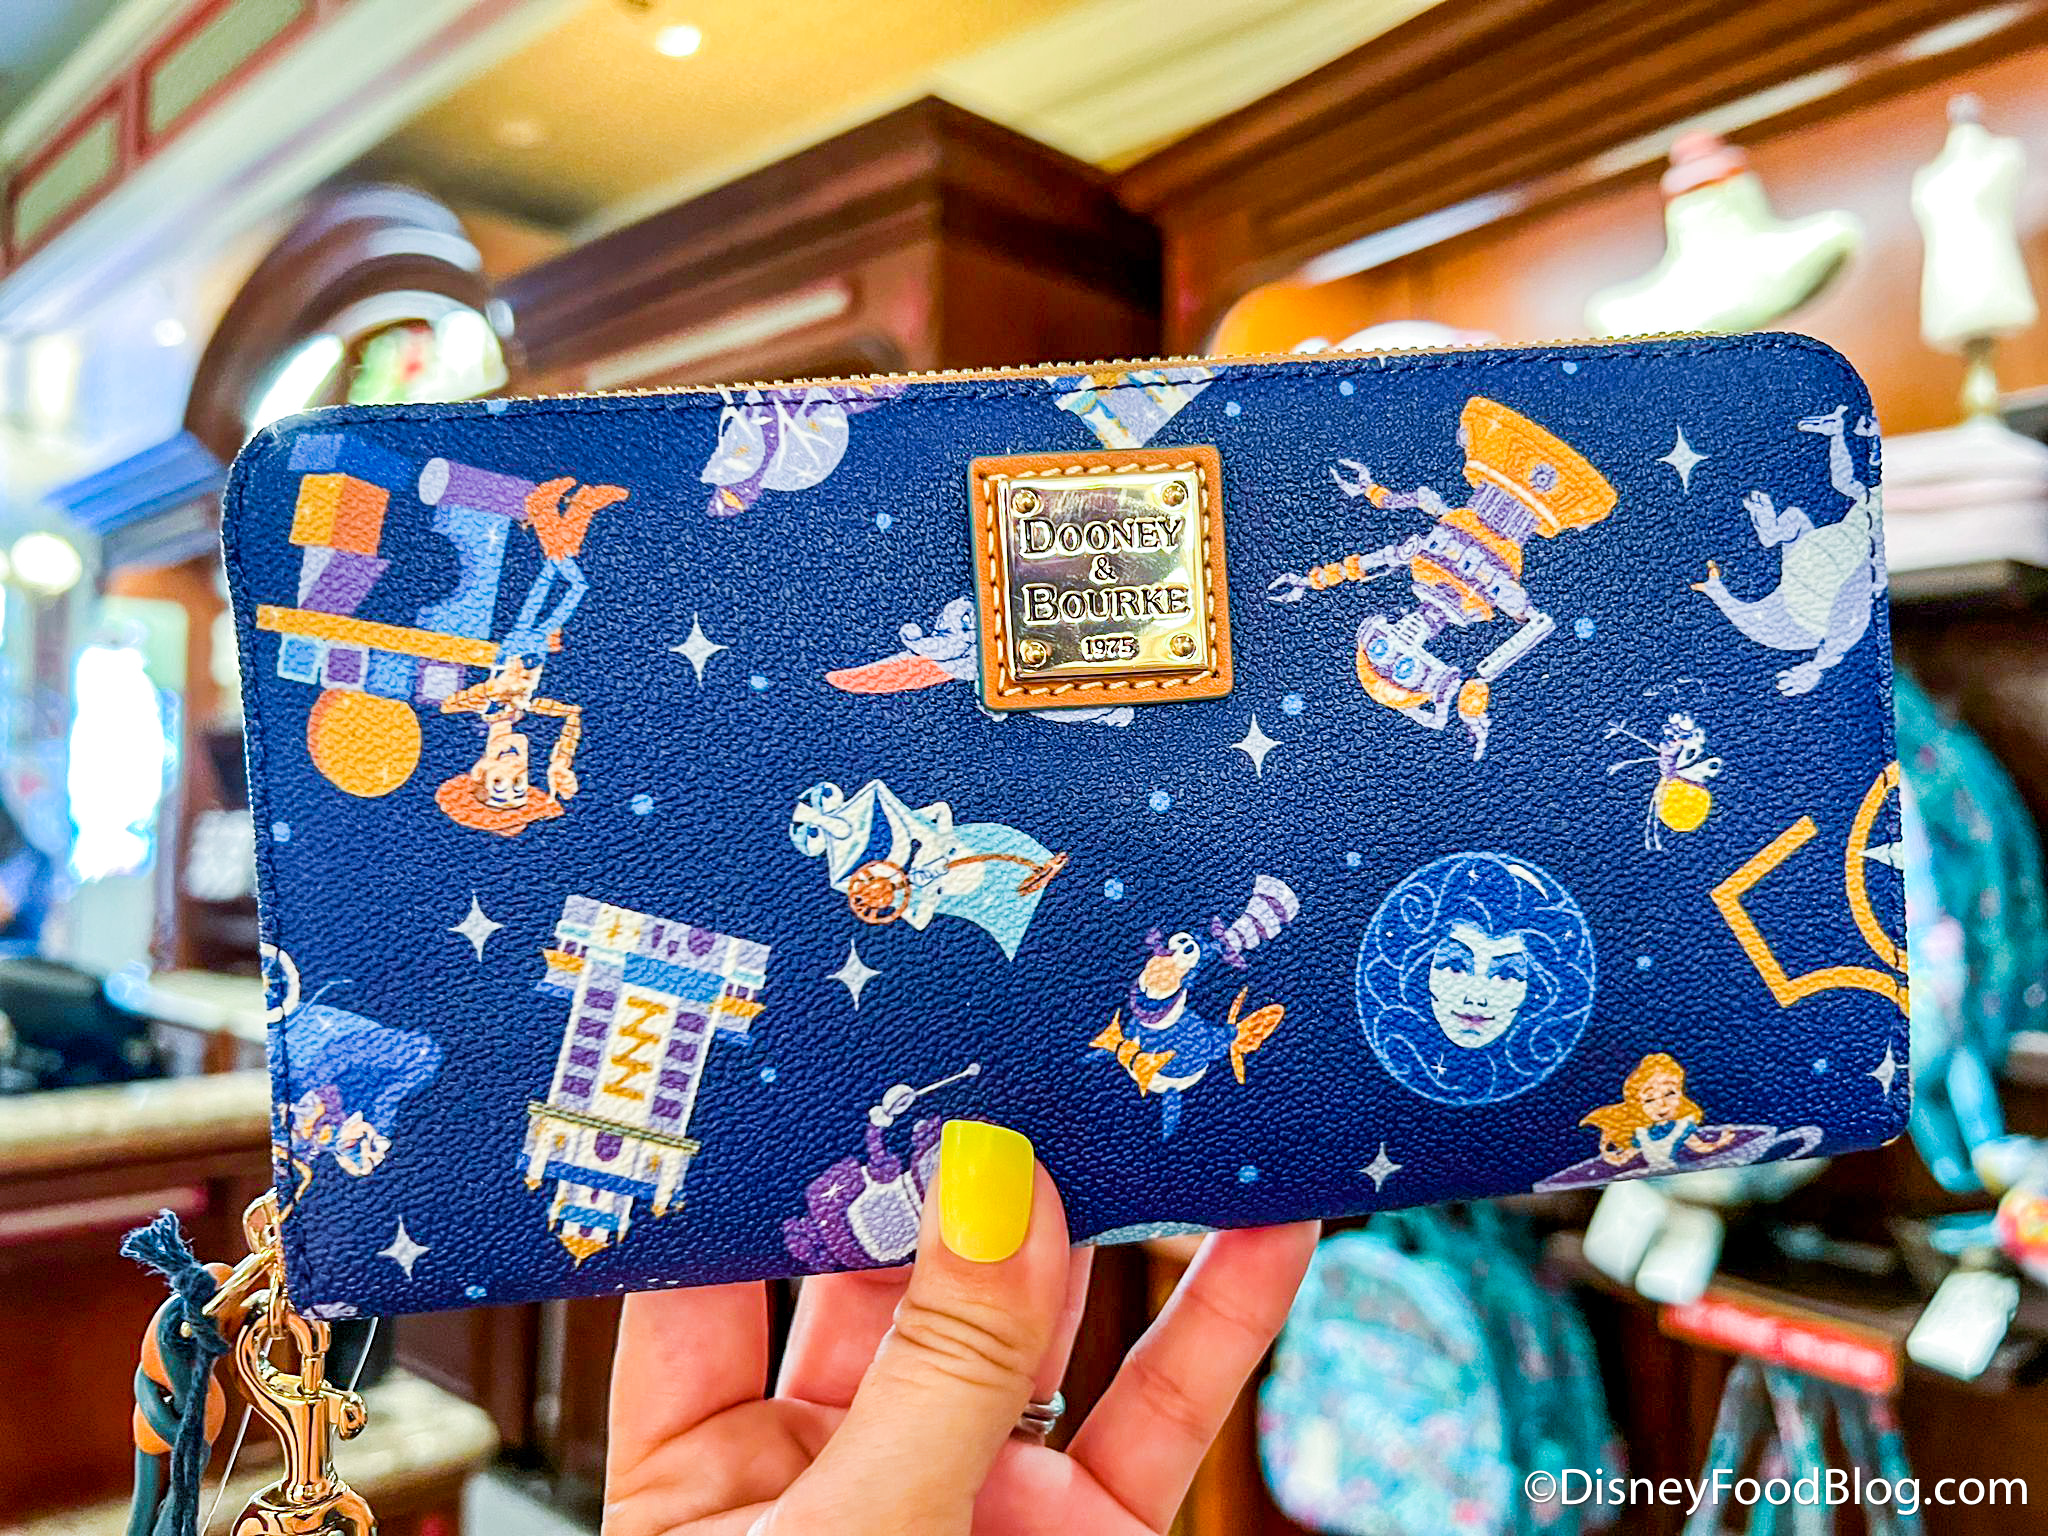 PHOTOS: Disney World Just Dropped A New 50th Anniversary Dooney & Bourke Bag  — And it's EPIC